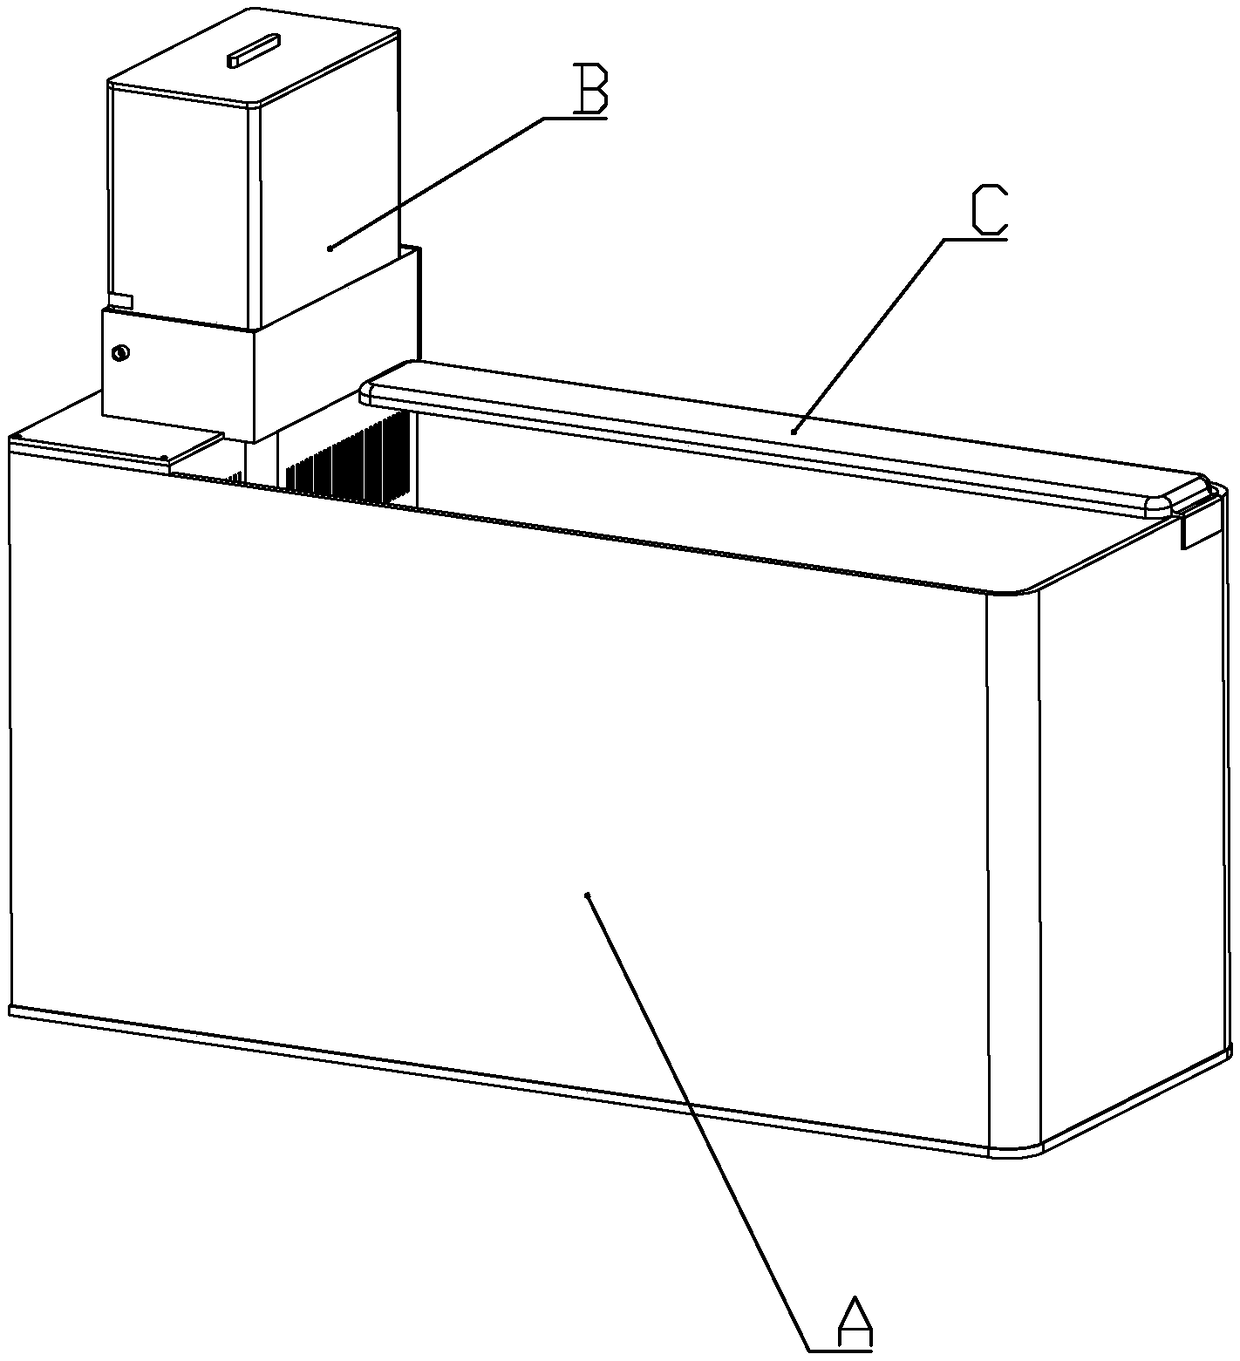 Lateral-filtering-type fish tank